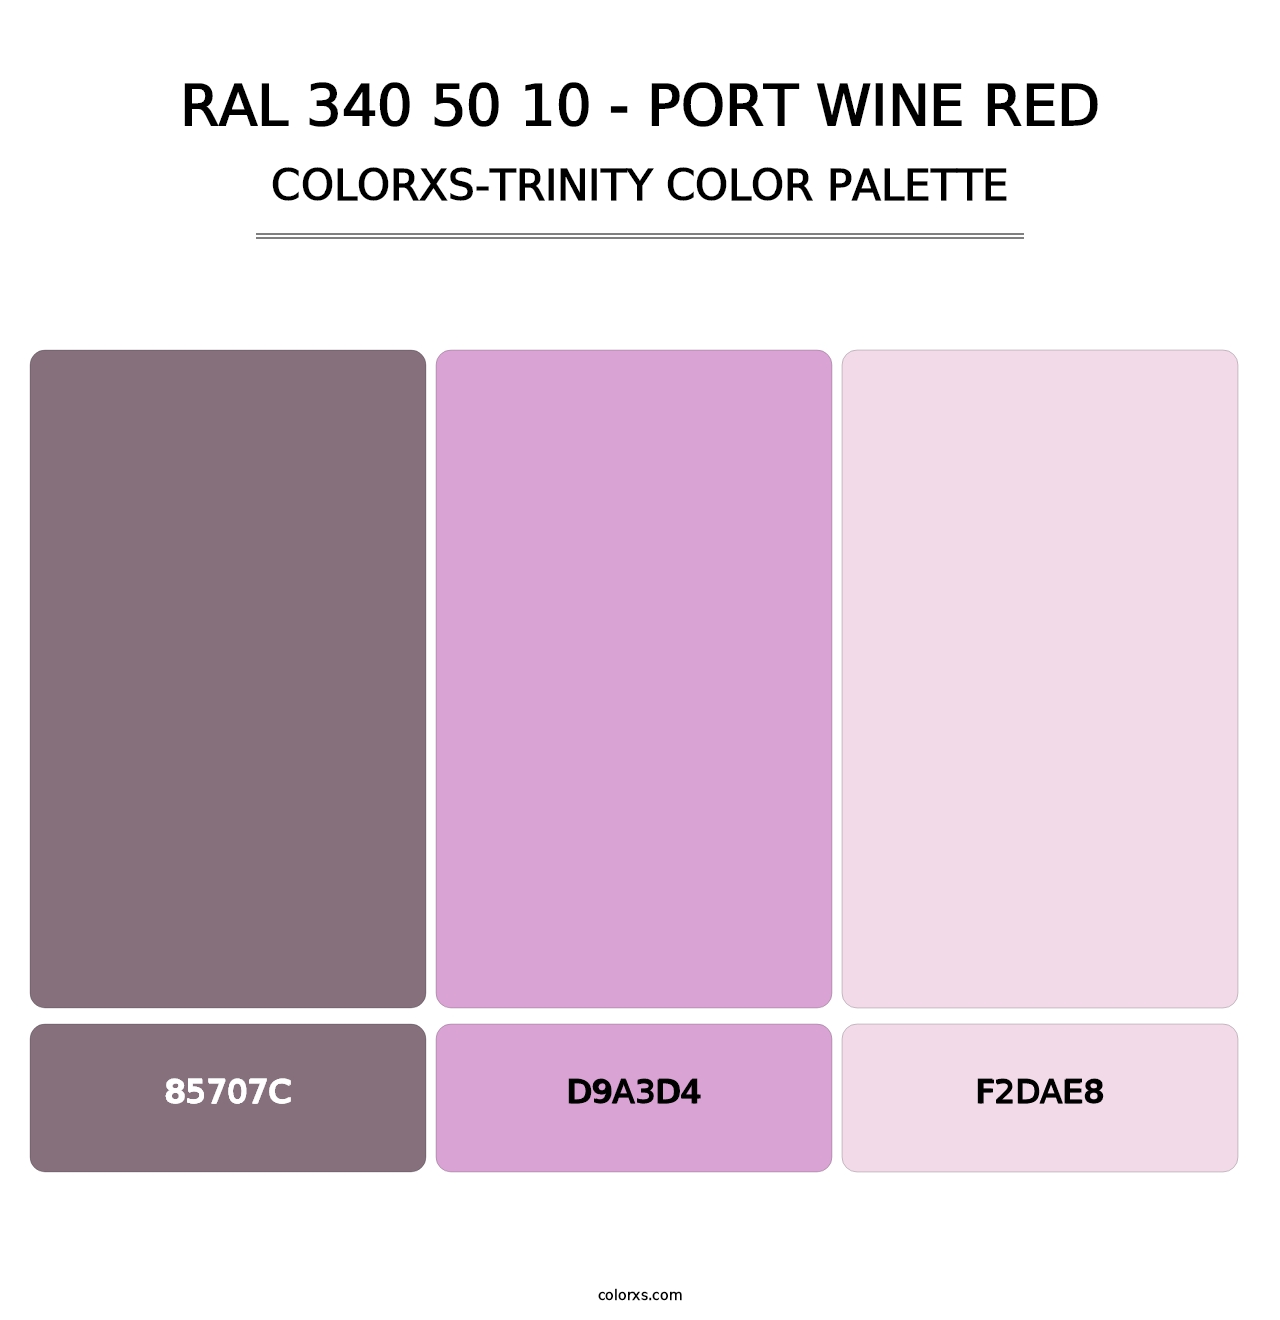 RAL 340 50 10 - Port Wine Red - Colorxs Trinity Palette